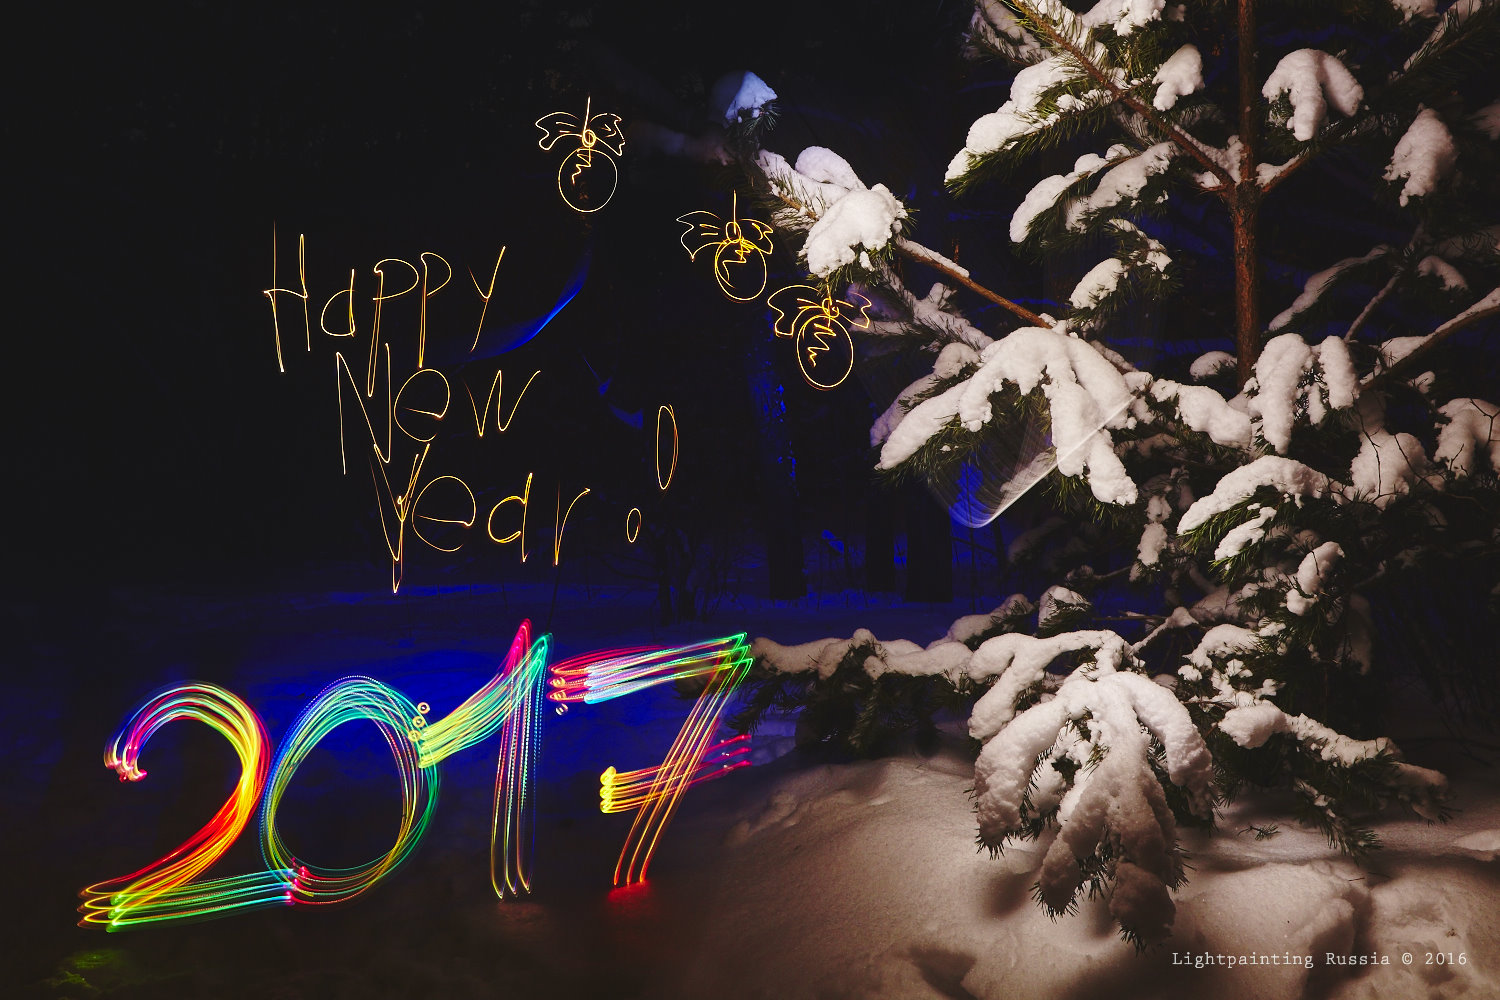 Light painting Happy new year 2017!